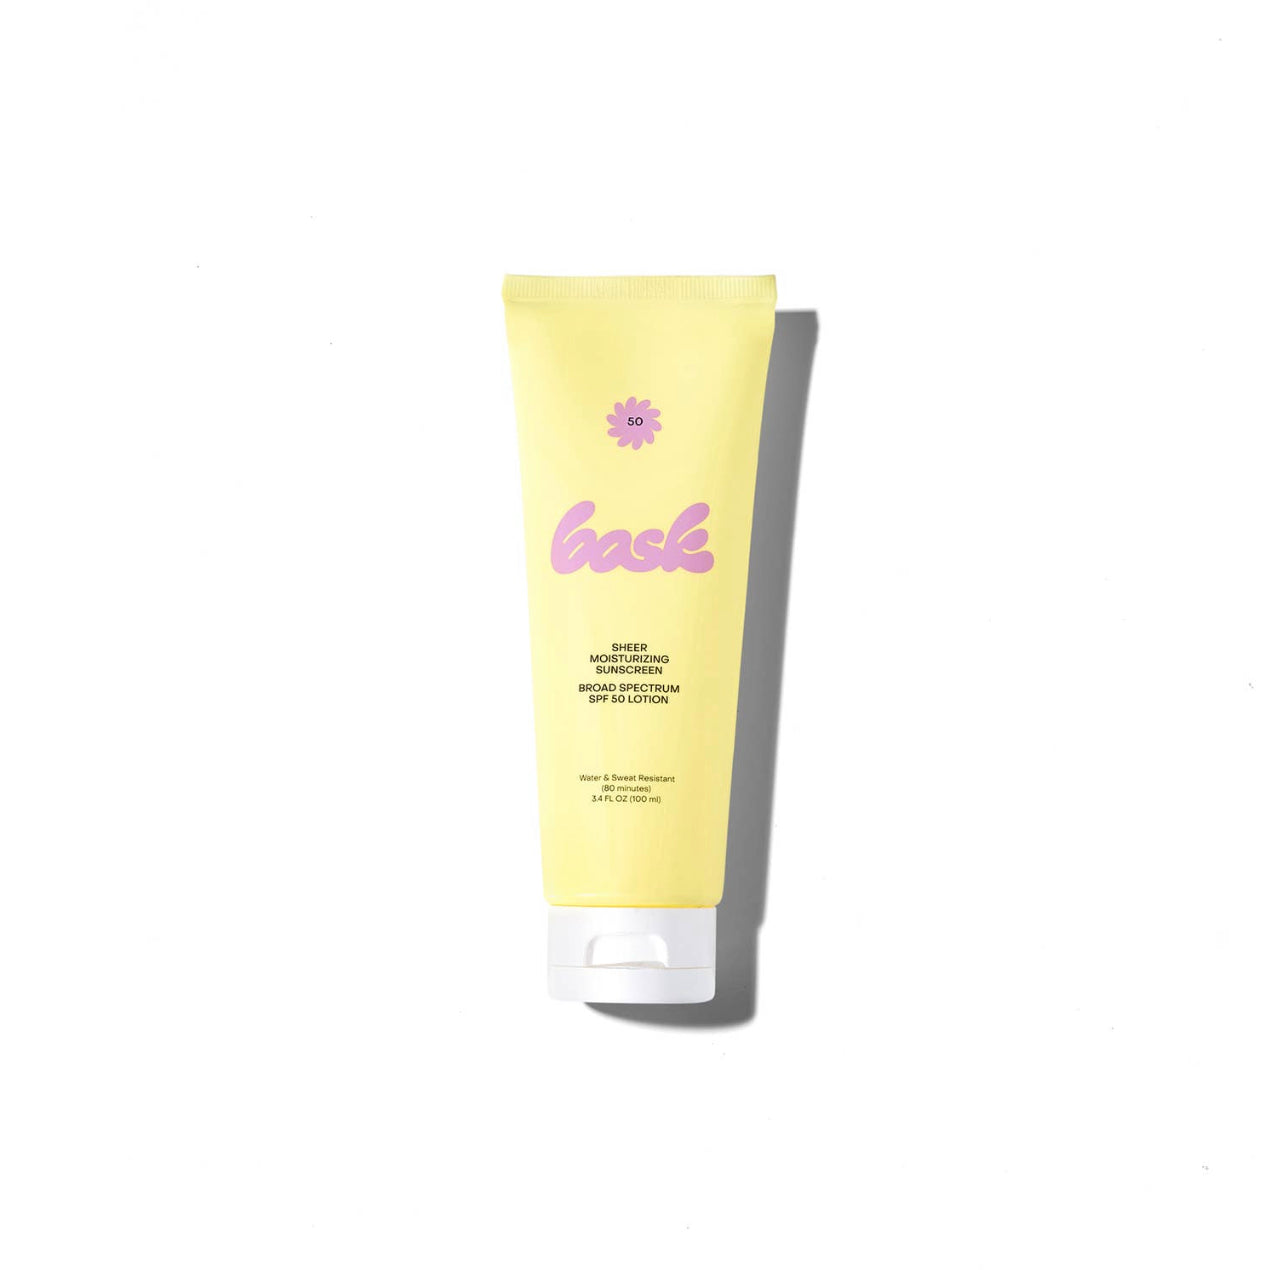 NEW! SPF 50 LOTION